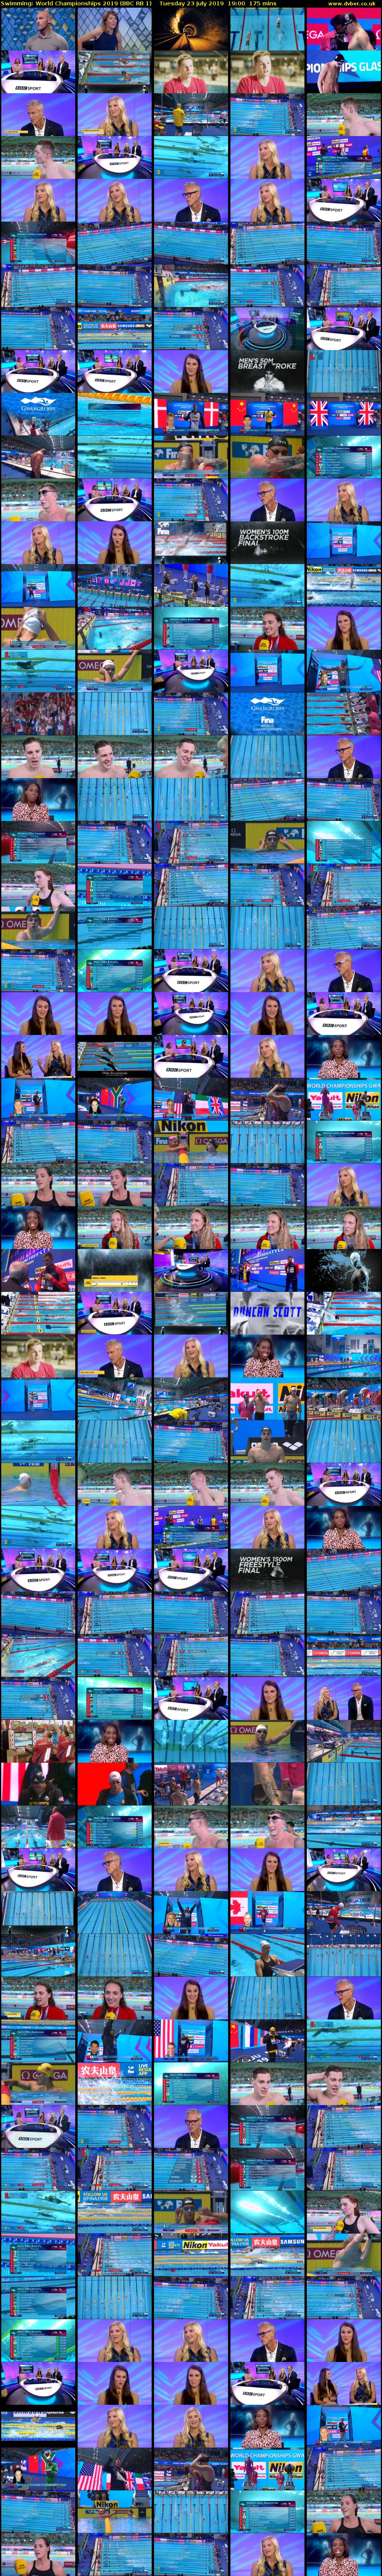 Swimming: World Championships 2019 (BBC RB 1) Tuesday 23 July 2019 19:00 - 21:55